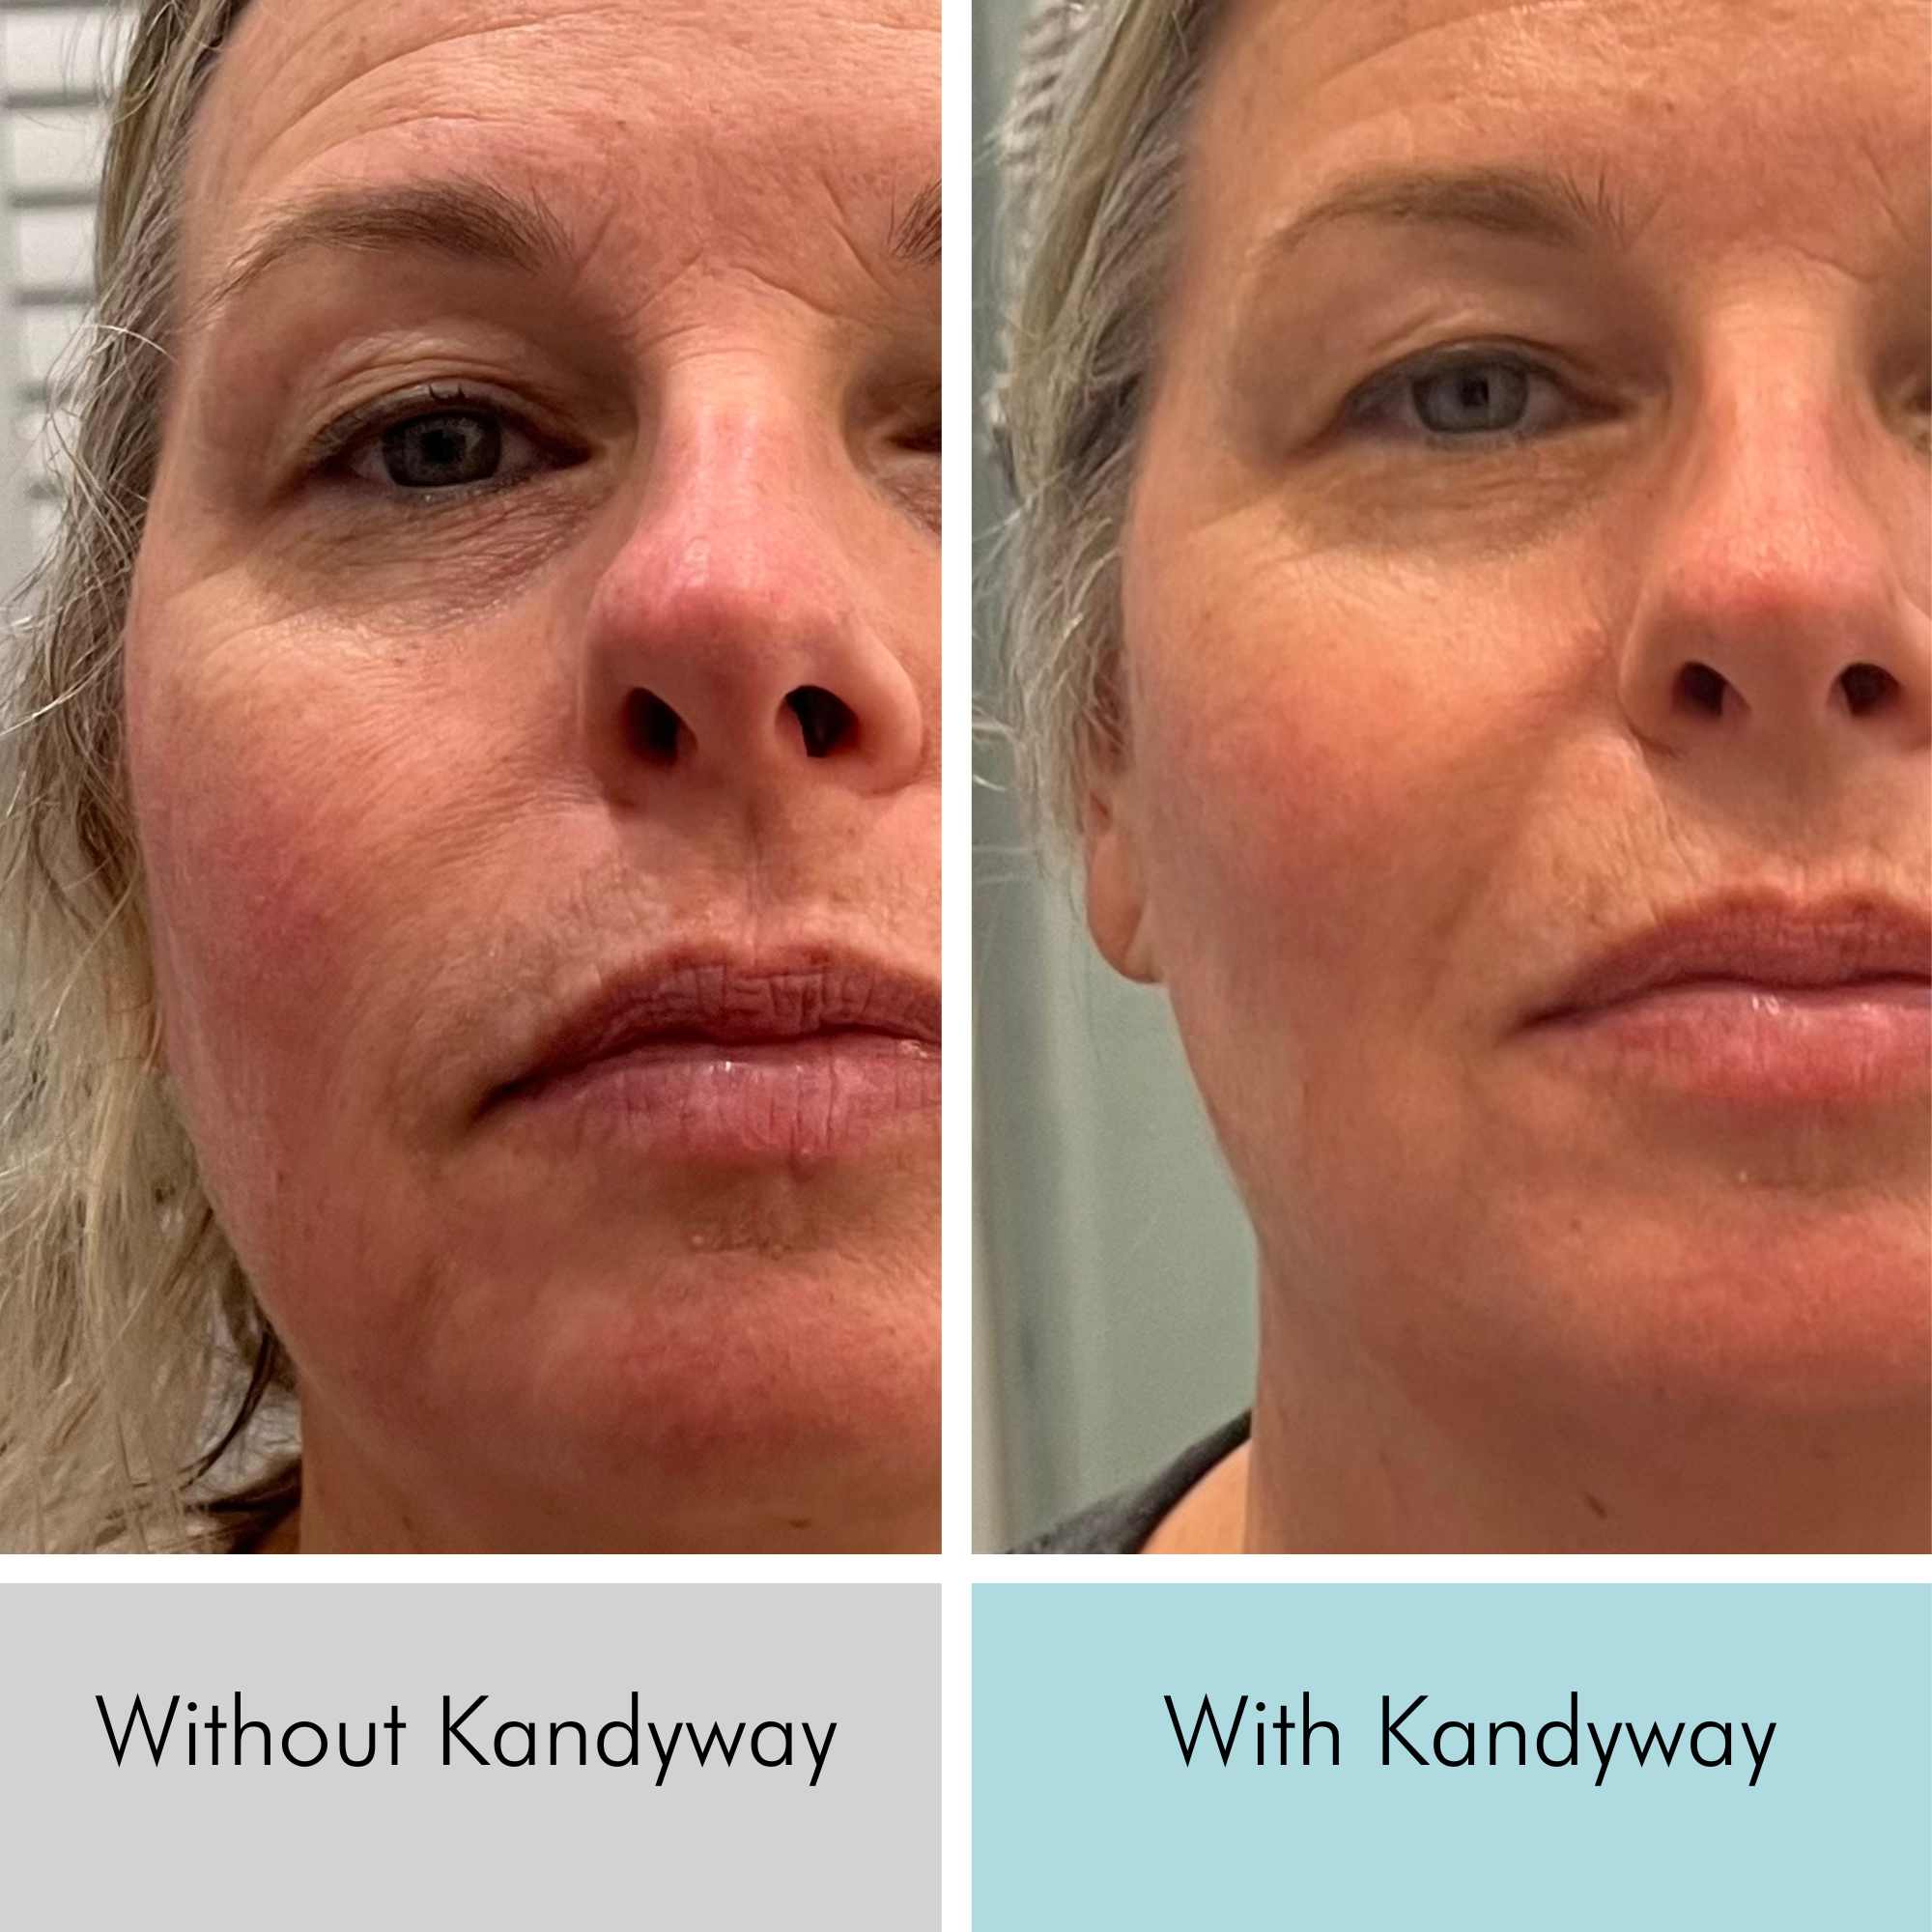 51 year old women Wrinkle reduction, reduced redness & smoother skin